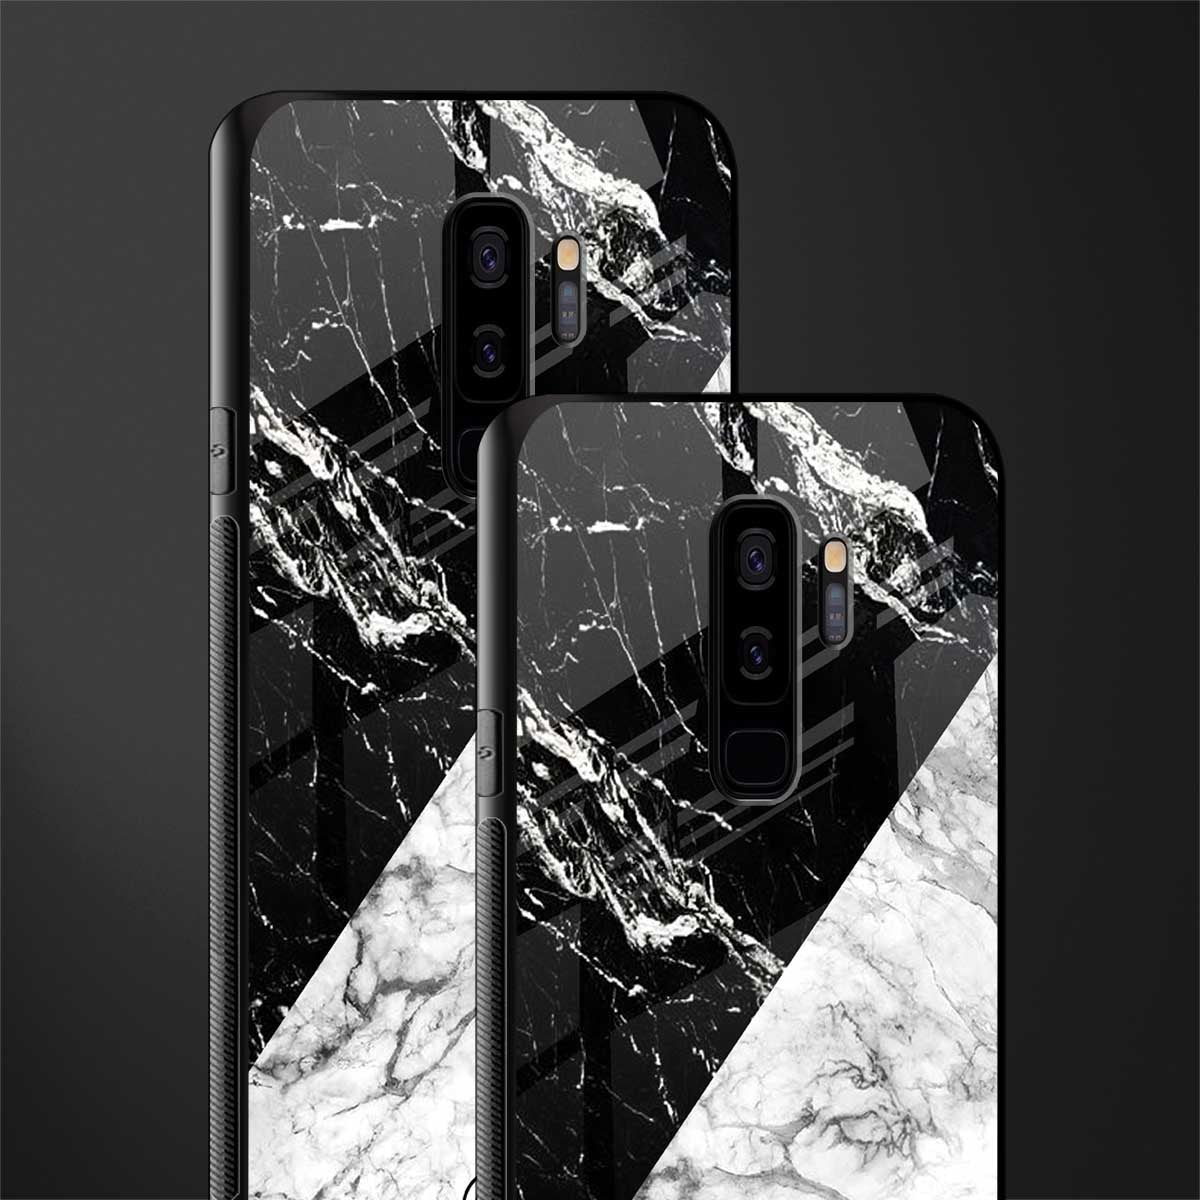 fatal contradiction phone cover for samsung galaxy s9 plus